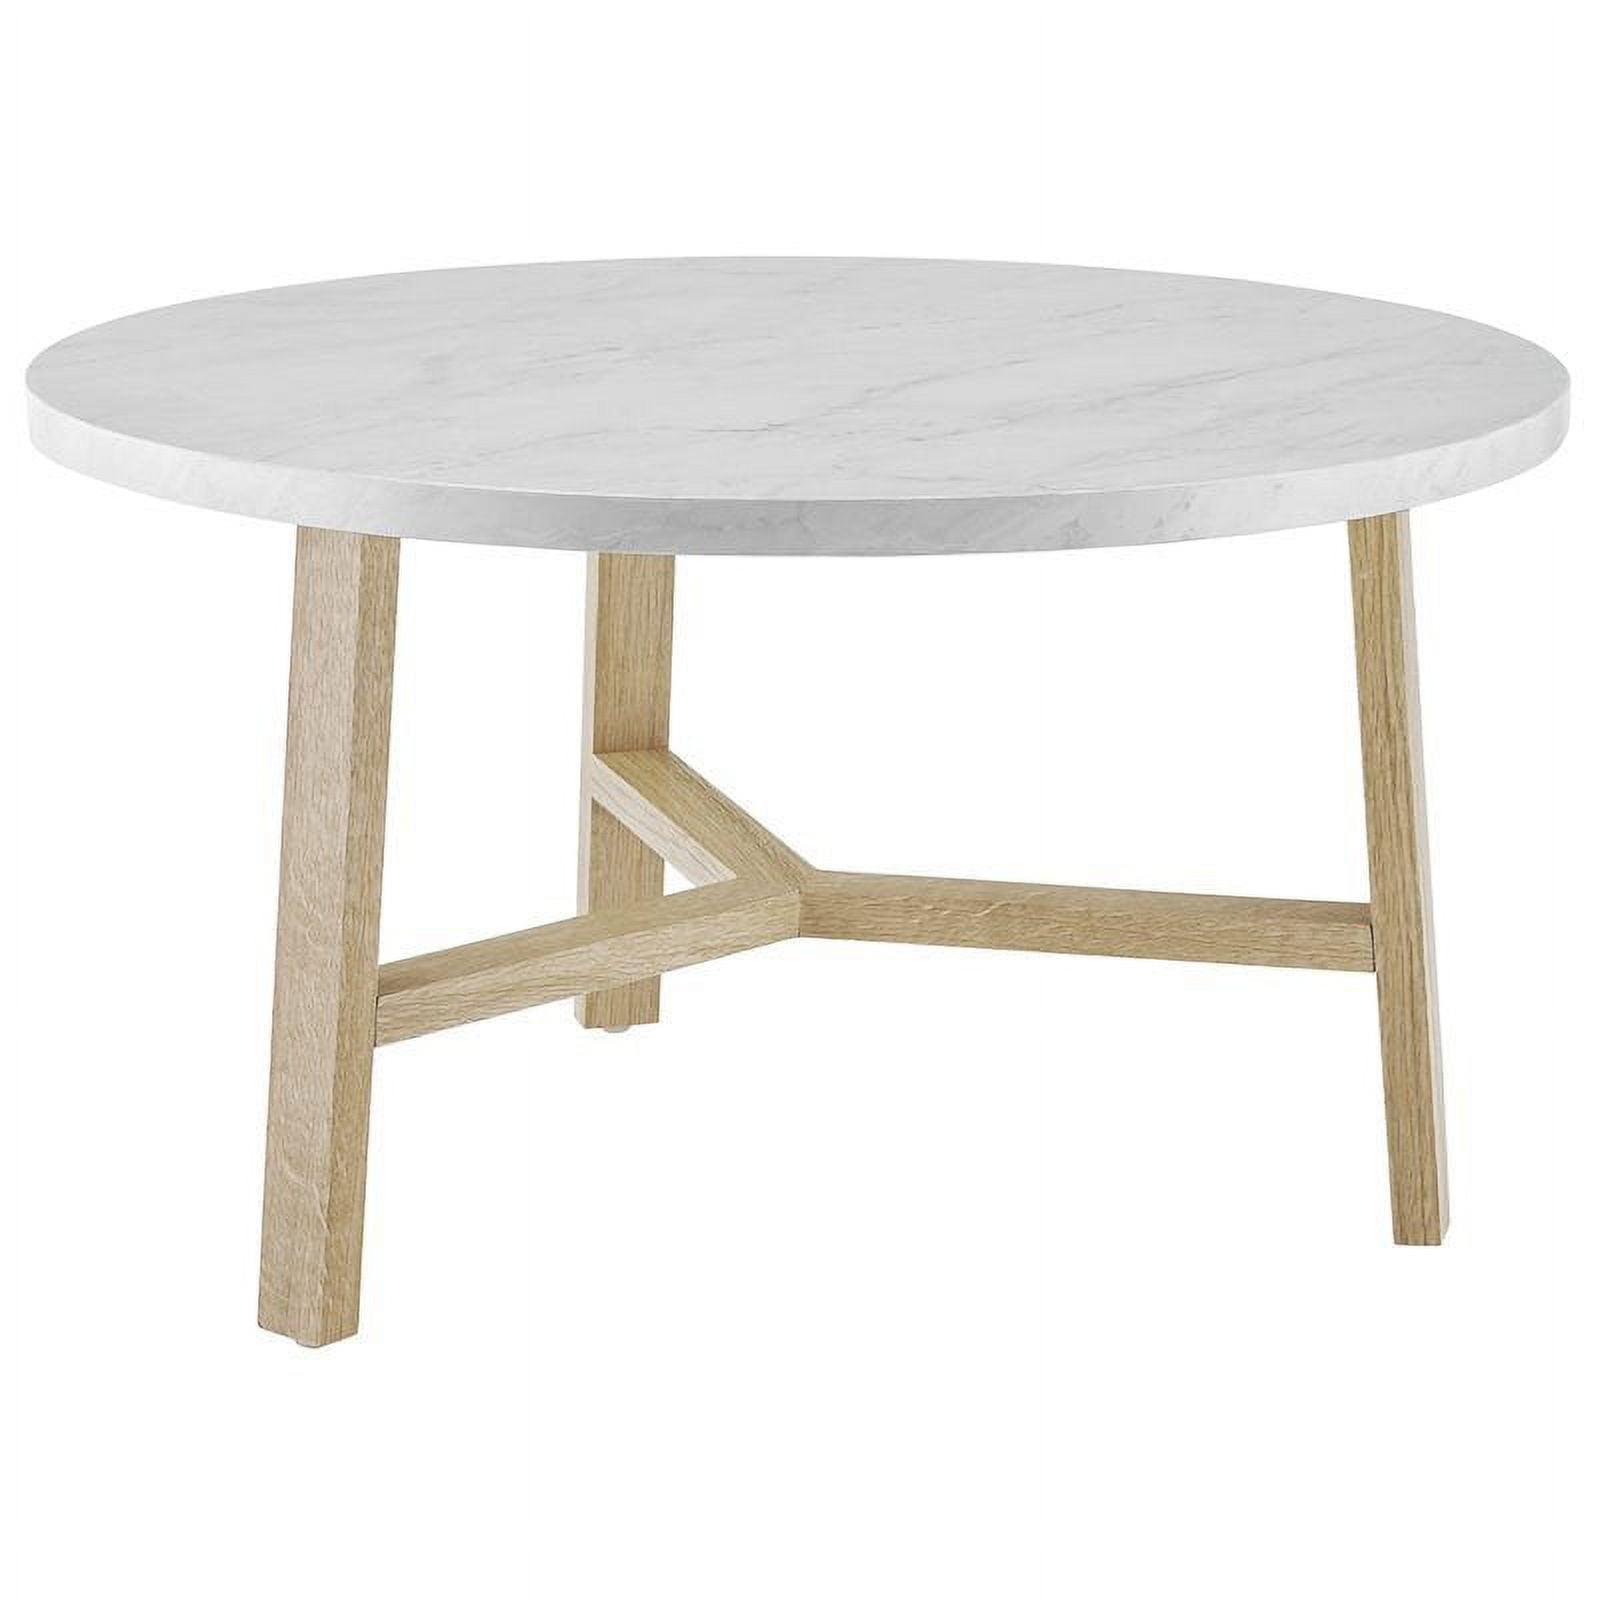 30" Round White Marble and Light Oak Coffee Table